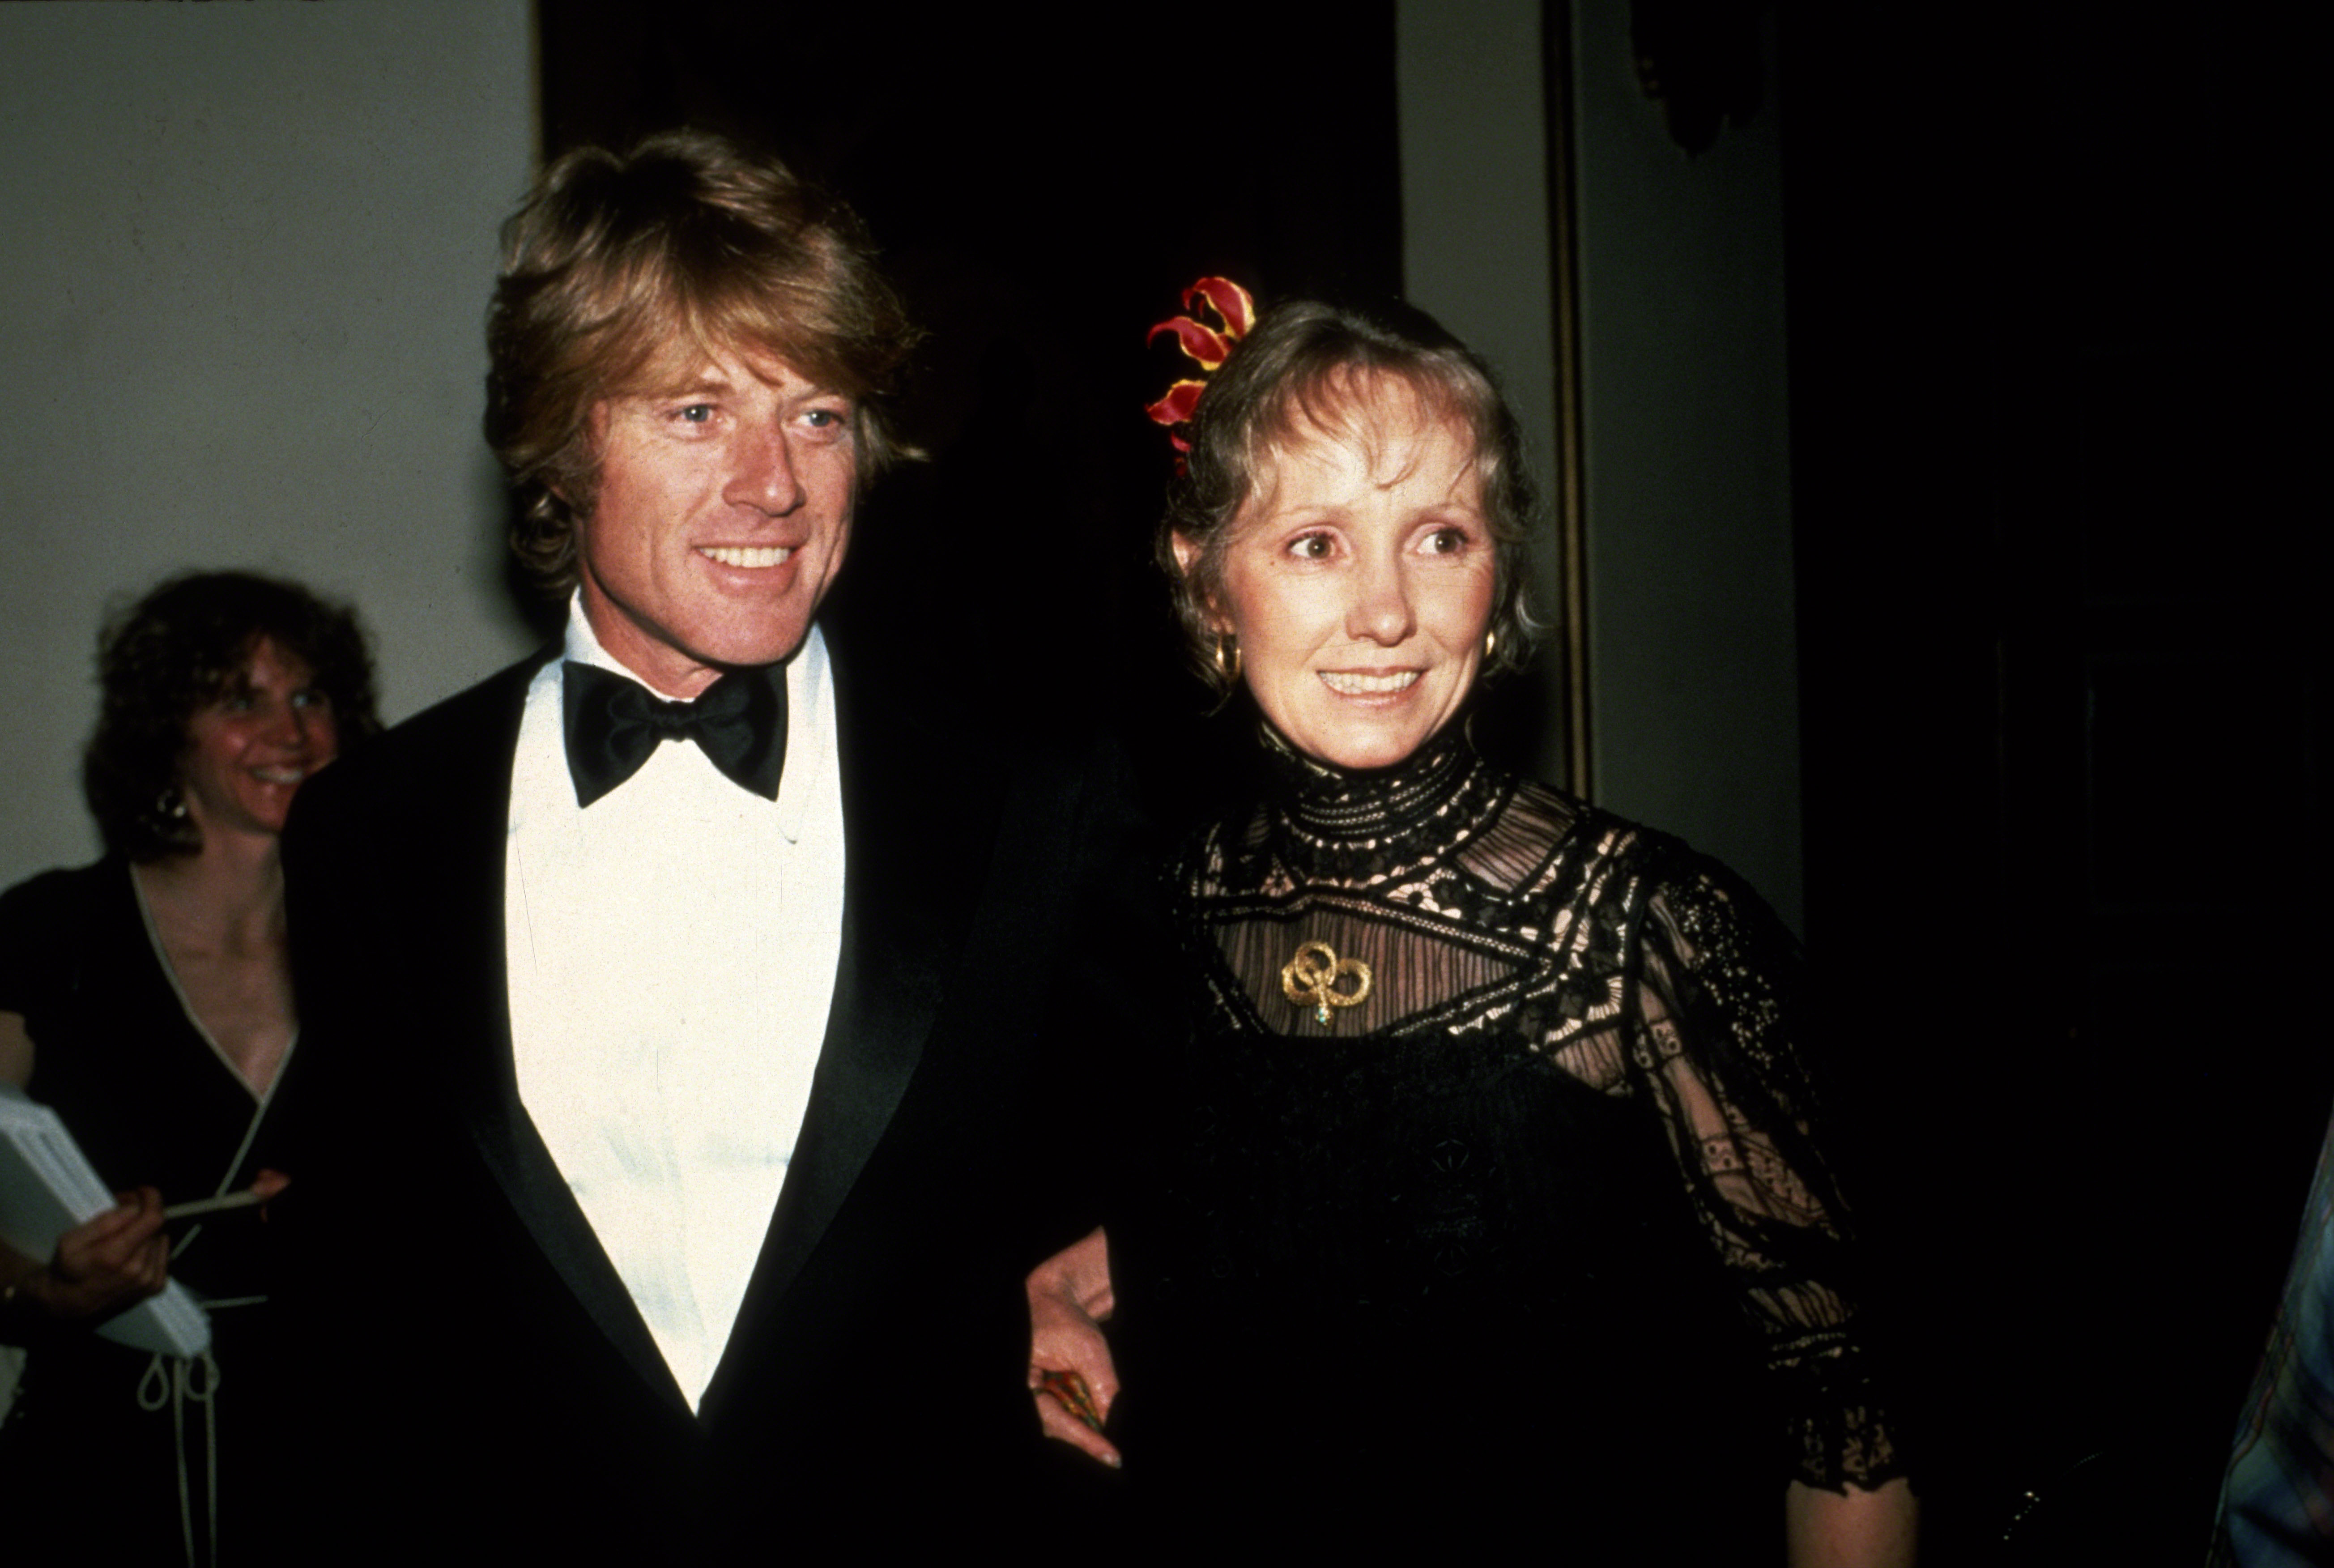 Robert Redford and Lola Van Wagenen attend the 53rd Academy Awards in Los Angeles, California, circa 1981. | Source: Getty Images